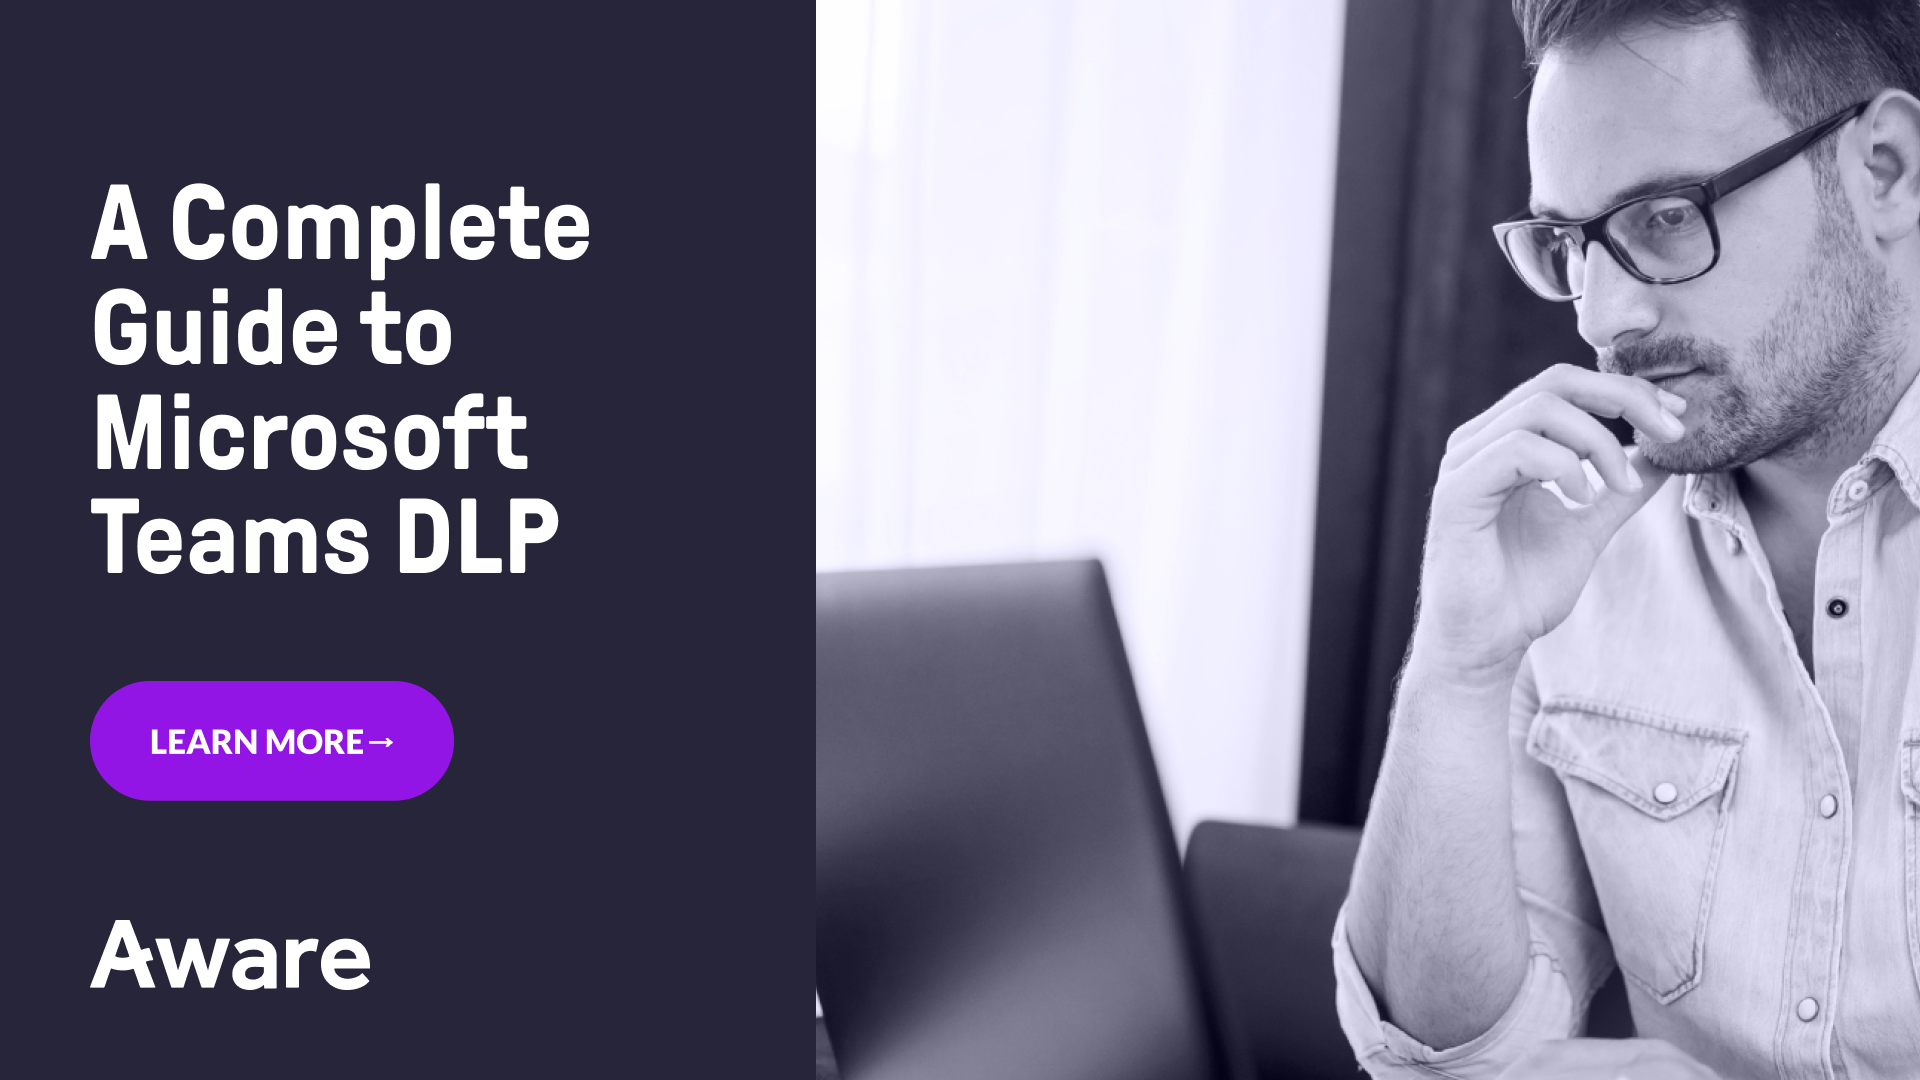 A Complete Guide to Microsoft Teams DLP